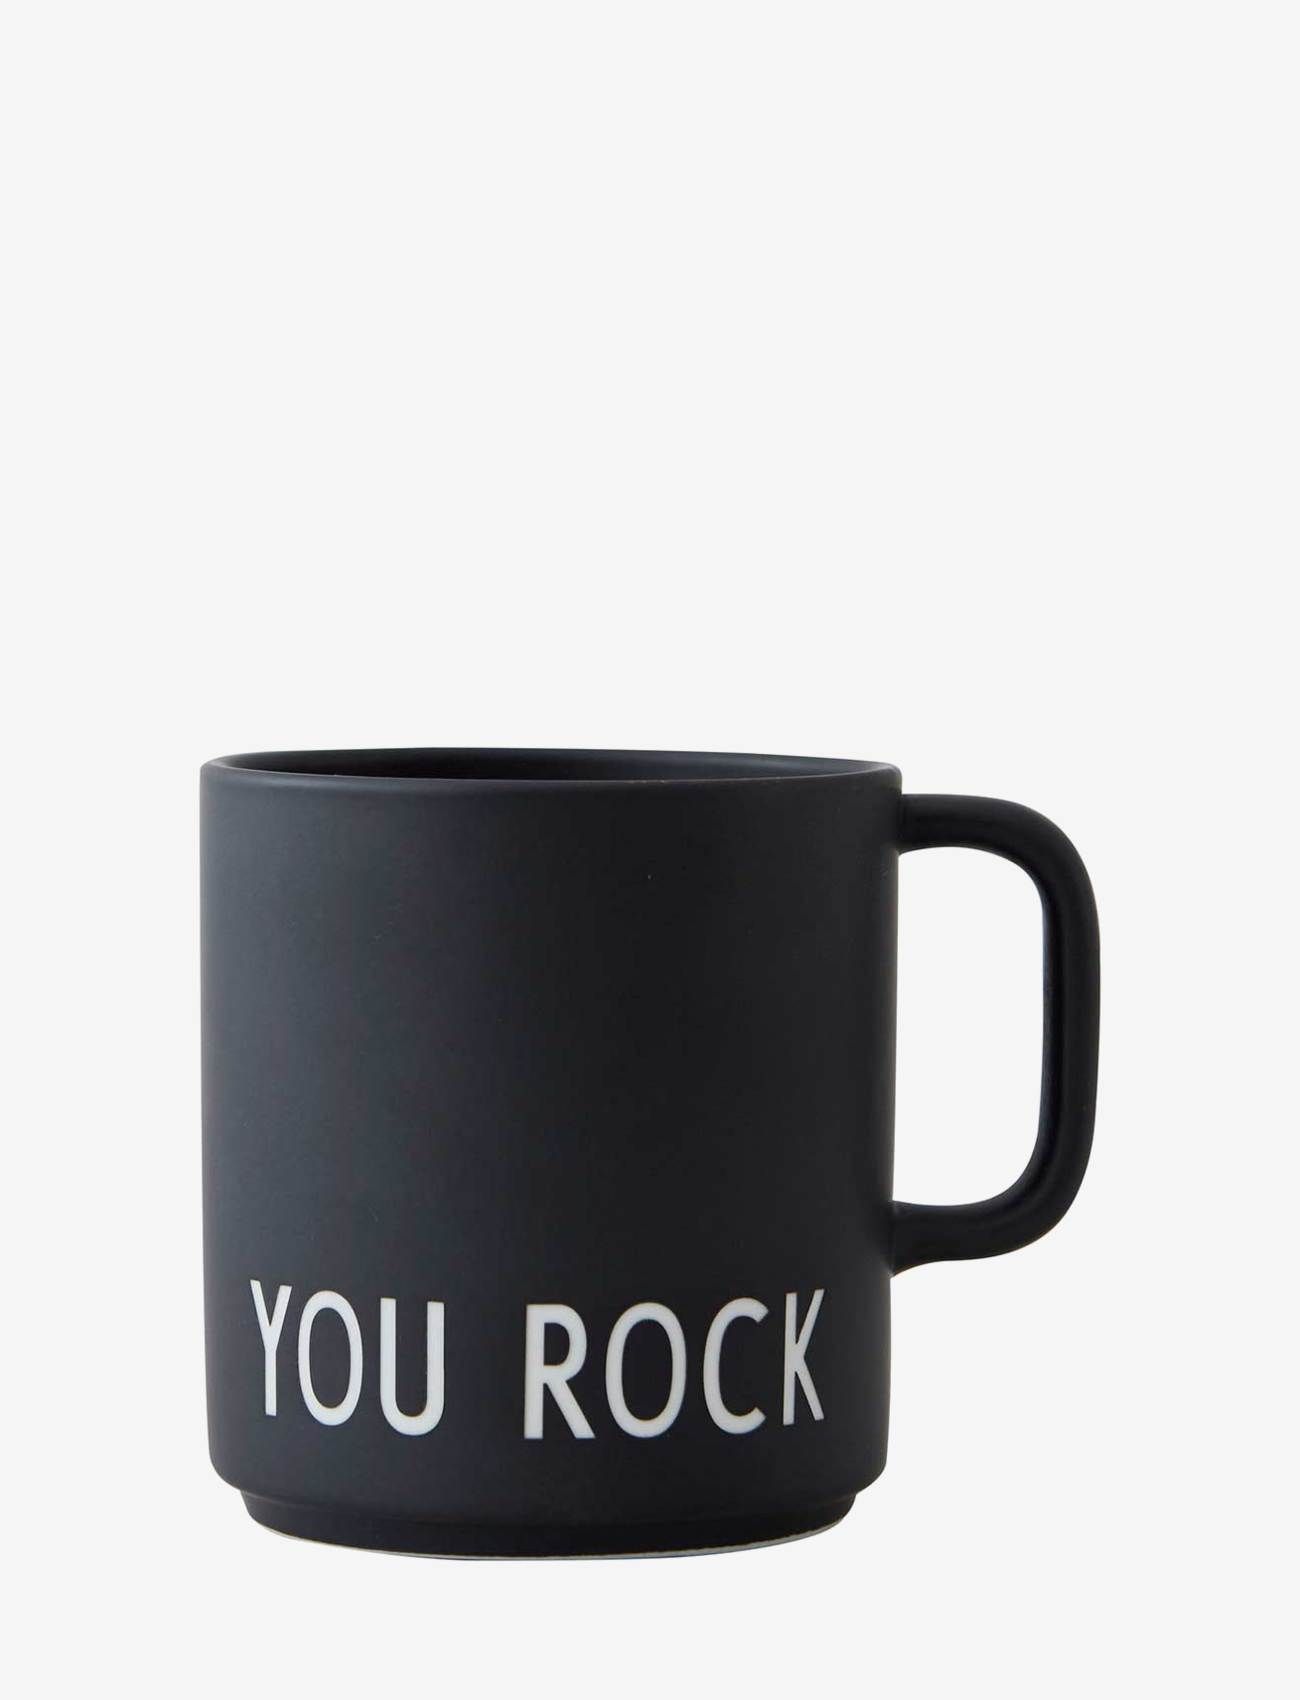 Design Letters - Favourite cup with handle - die niedrigsten preise - bkyourock - 0